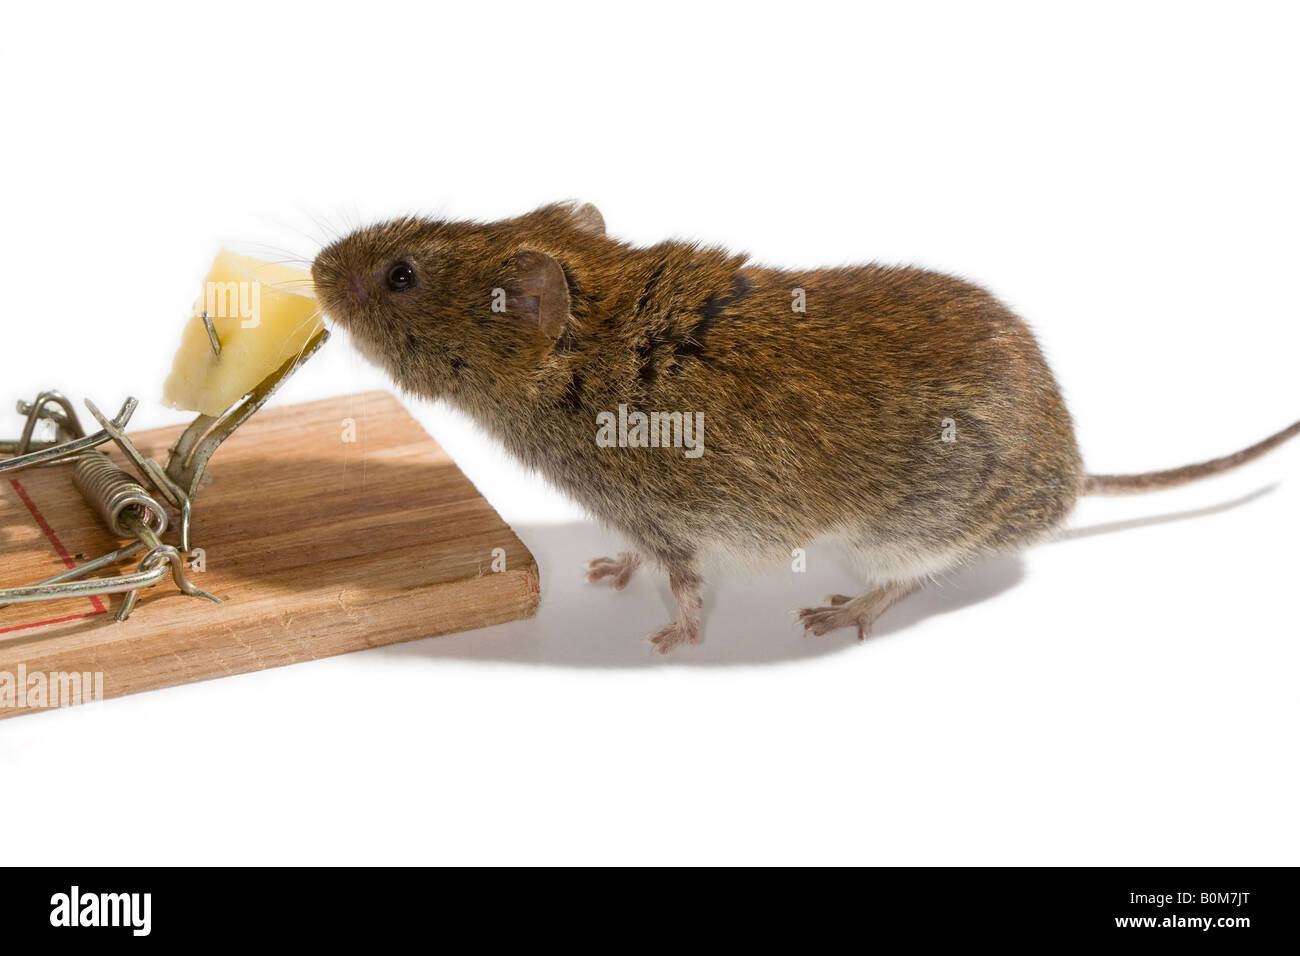 Vole about to take the cheese bait on a mousetrap Stock Photo